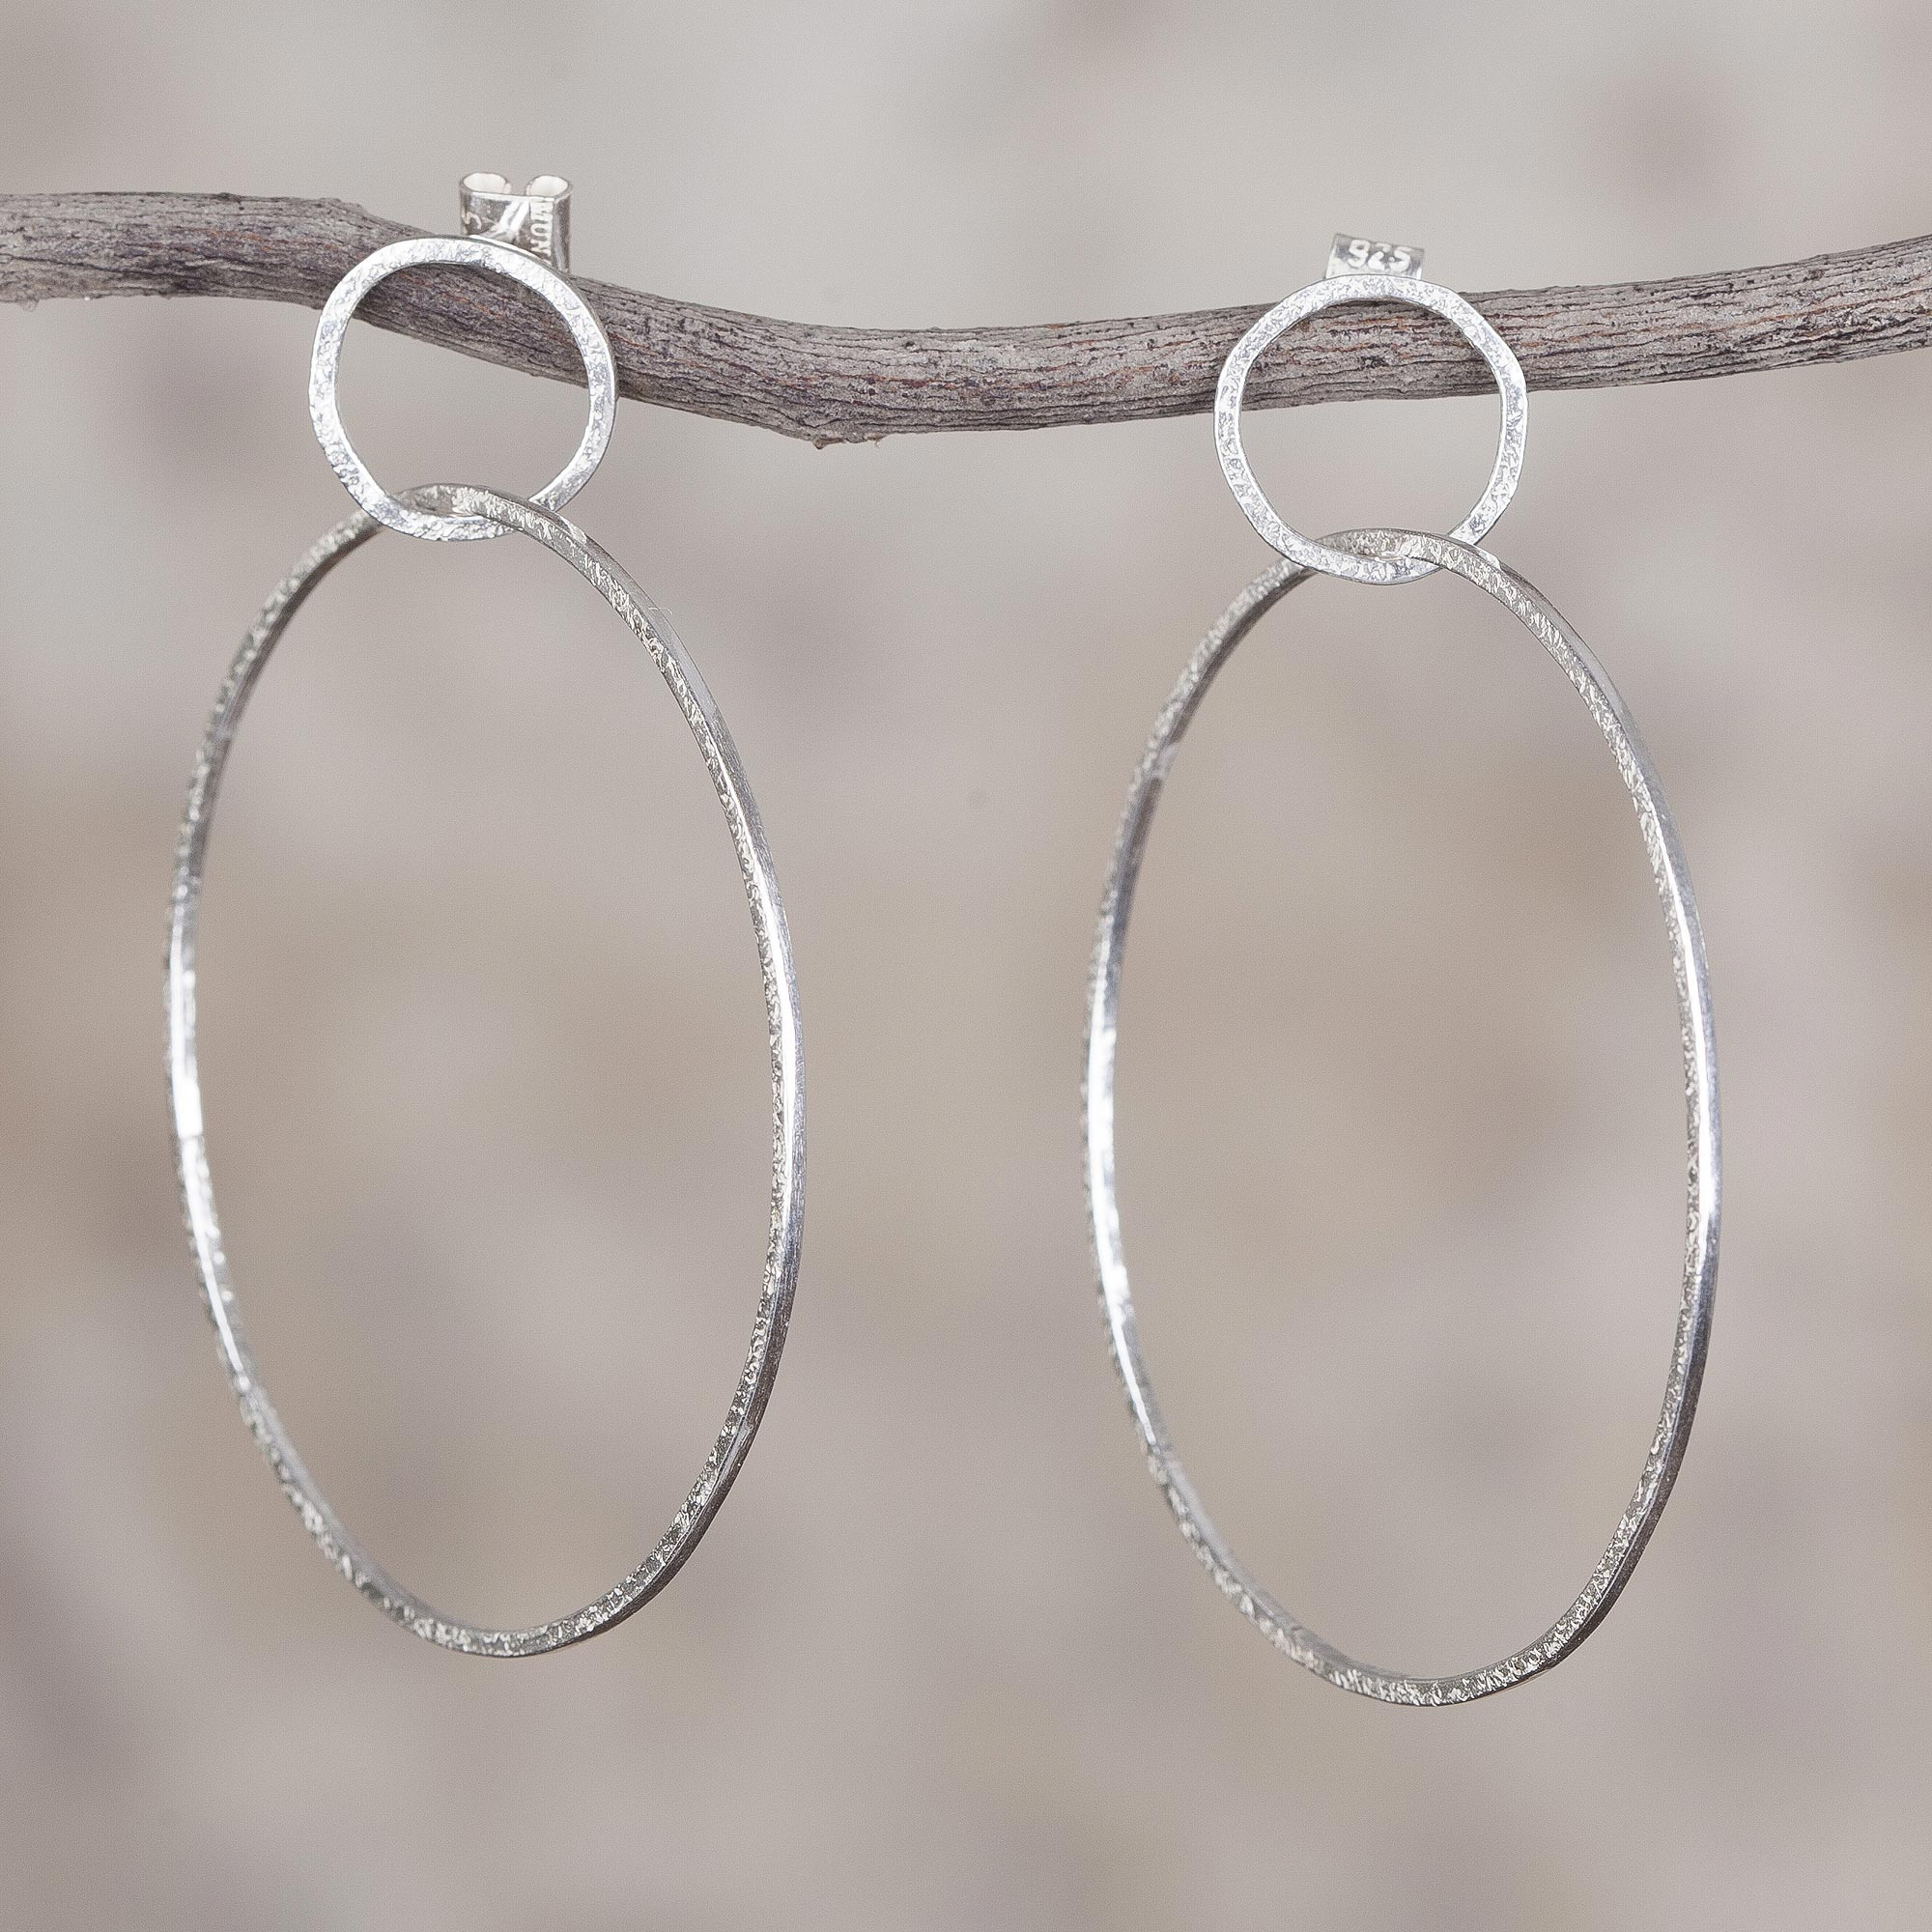 NOVICA Pair of .925 Sterling Silver Ear Cuffs Circle Shimmer